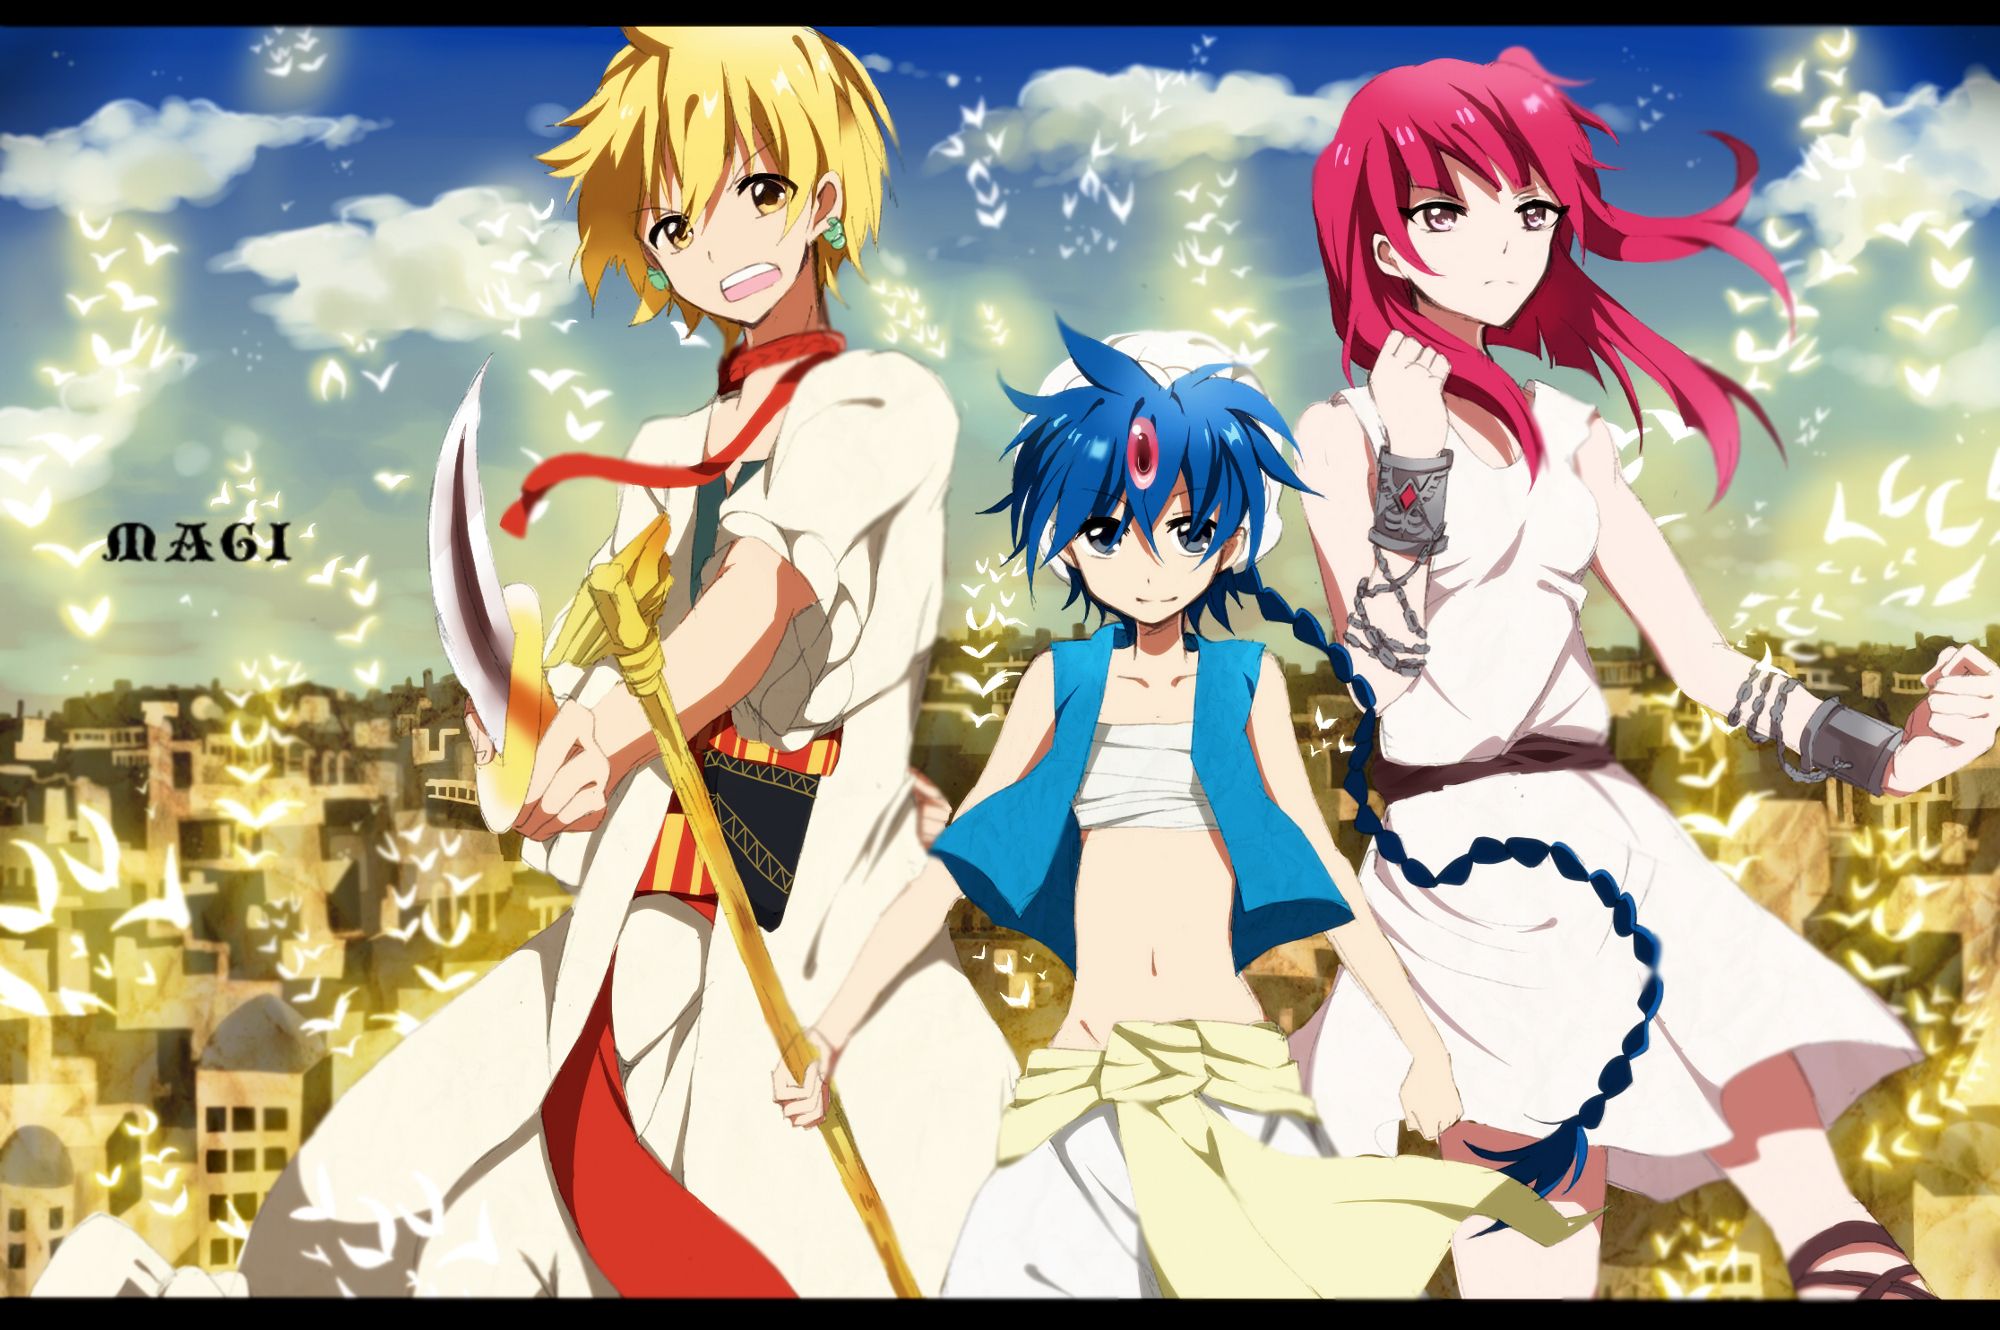 magi, The, Labyrinth, Of, Magic Wallpaper HD / Desktop and Mobile Background